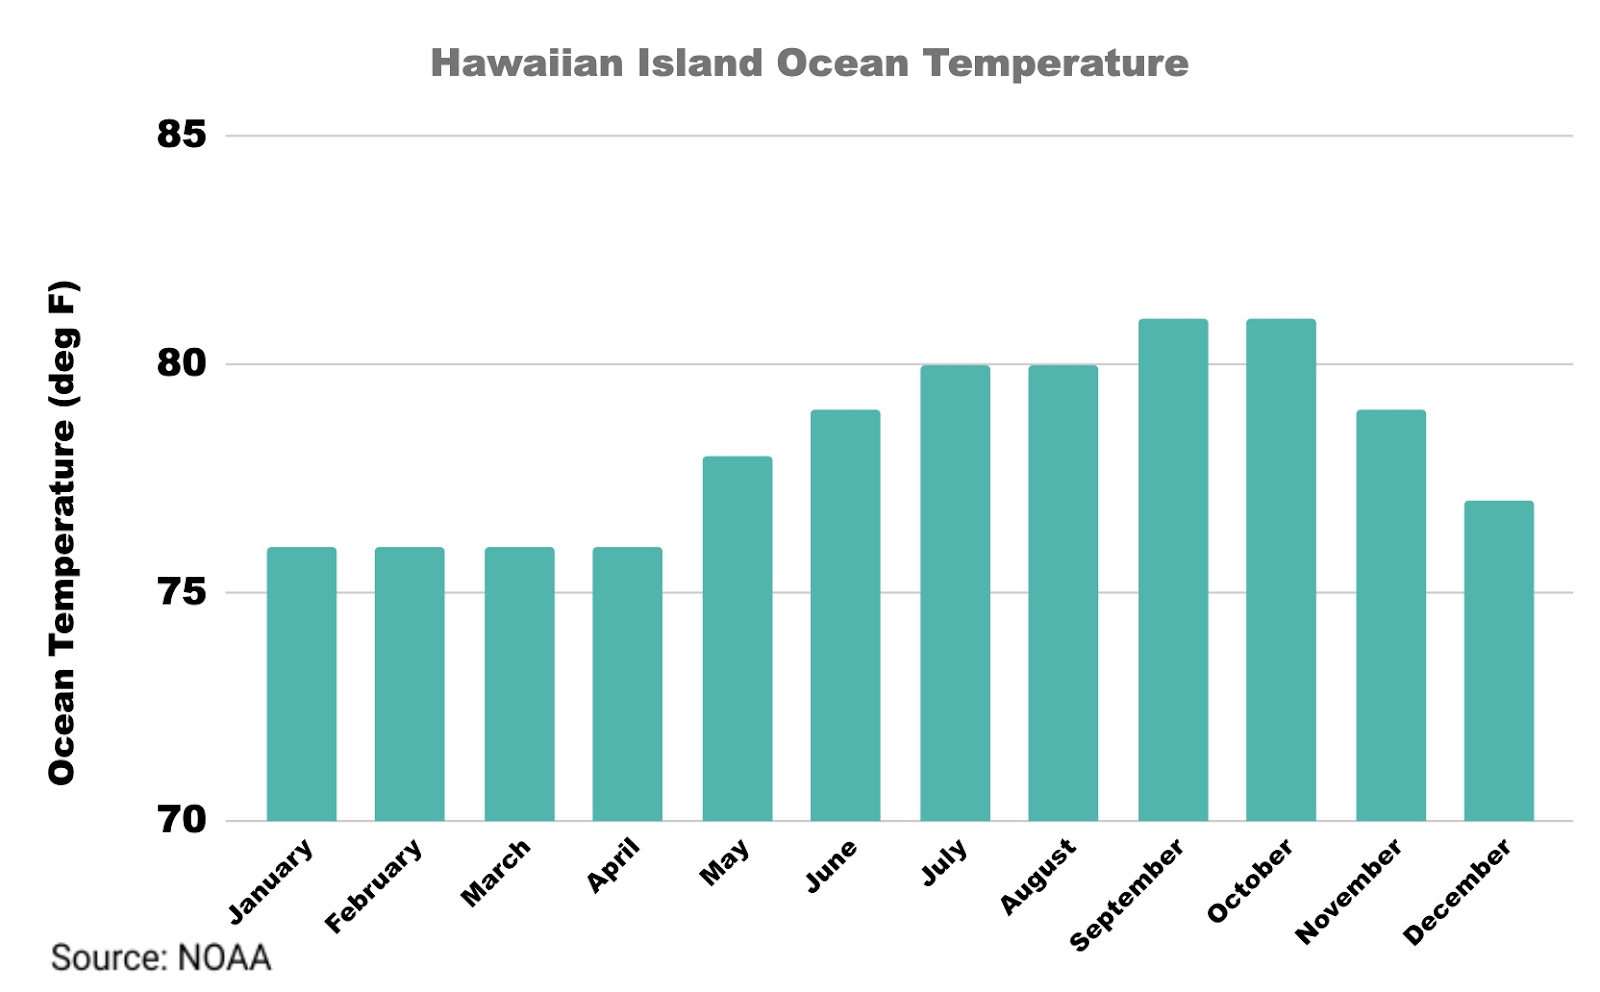 A graph by NOAA showing the ocean temperatures (Fahrenheit) around the Hawaiian islands throughout the year. January through April stays around a steady 76 degrees with the warmest temps in September and October reaching about 81 degrees. Hawaii in March has an ocean temperature of 76 degrees.